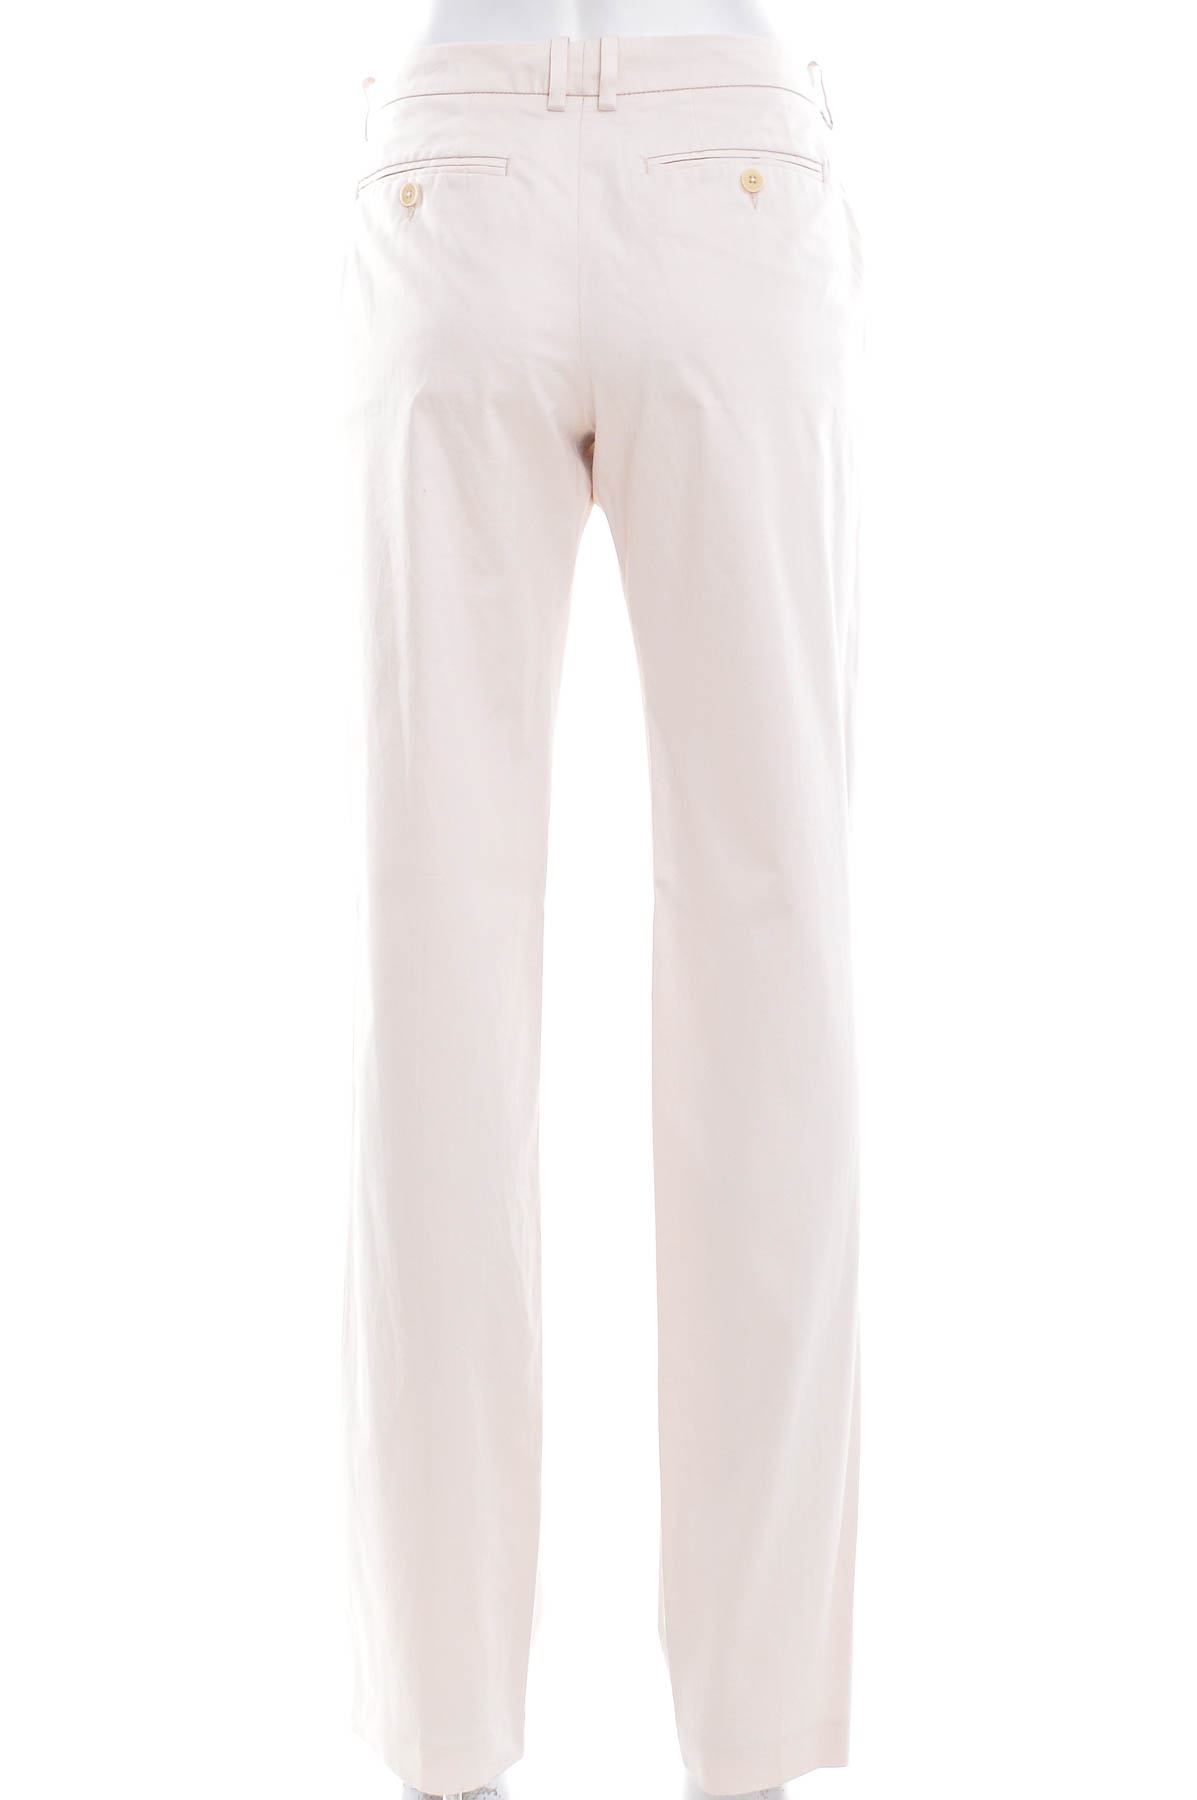 Women's trousers - DRYKORN FOR BEAUTIFUL PEOPLE - 1